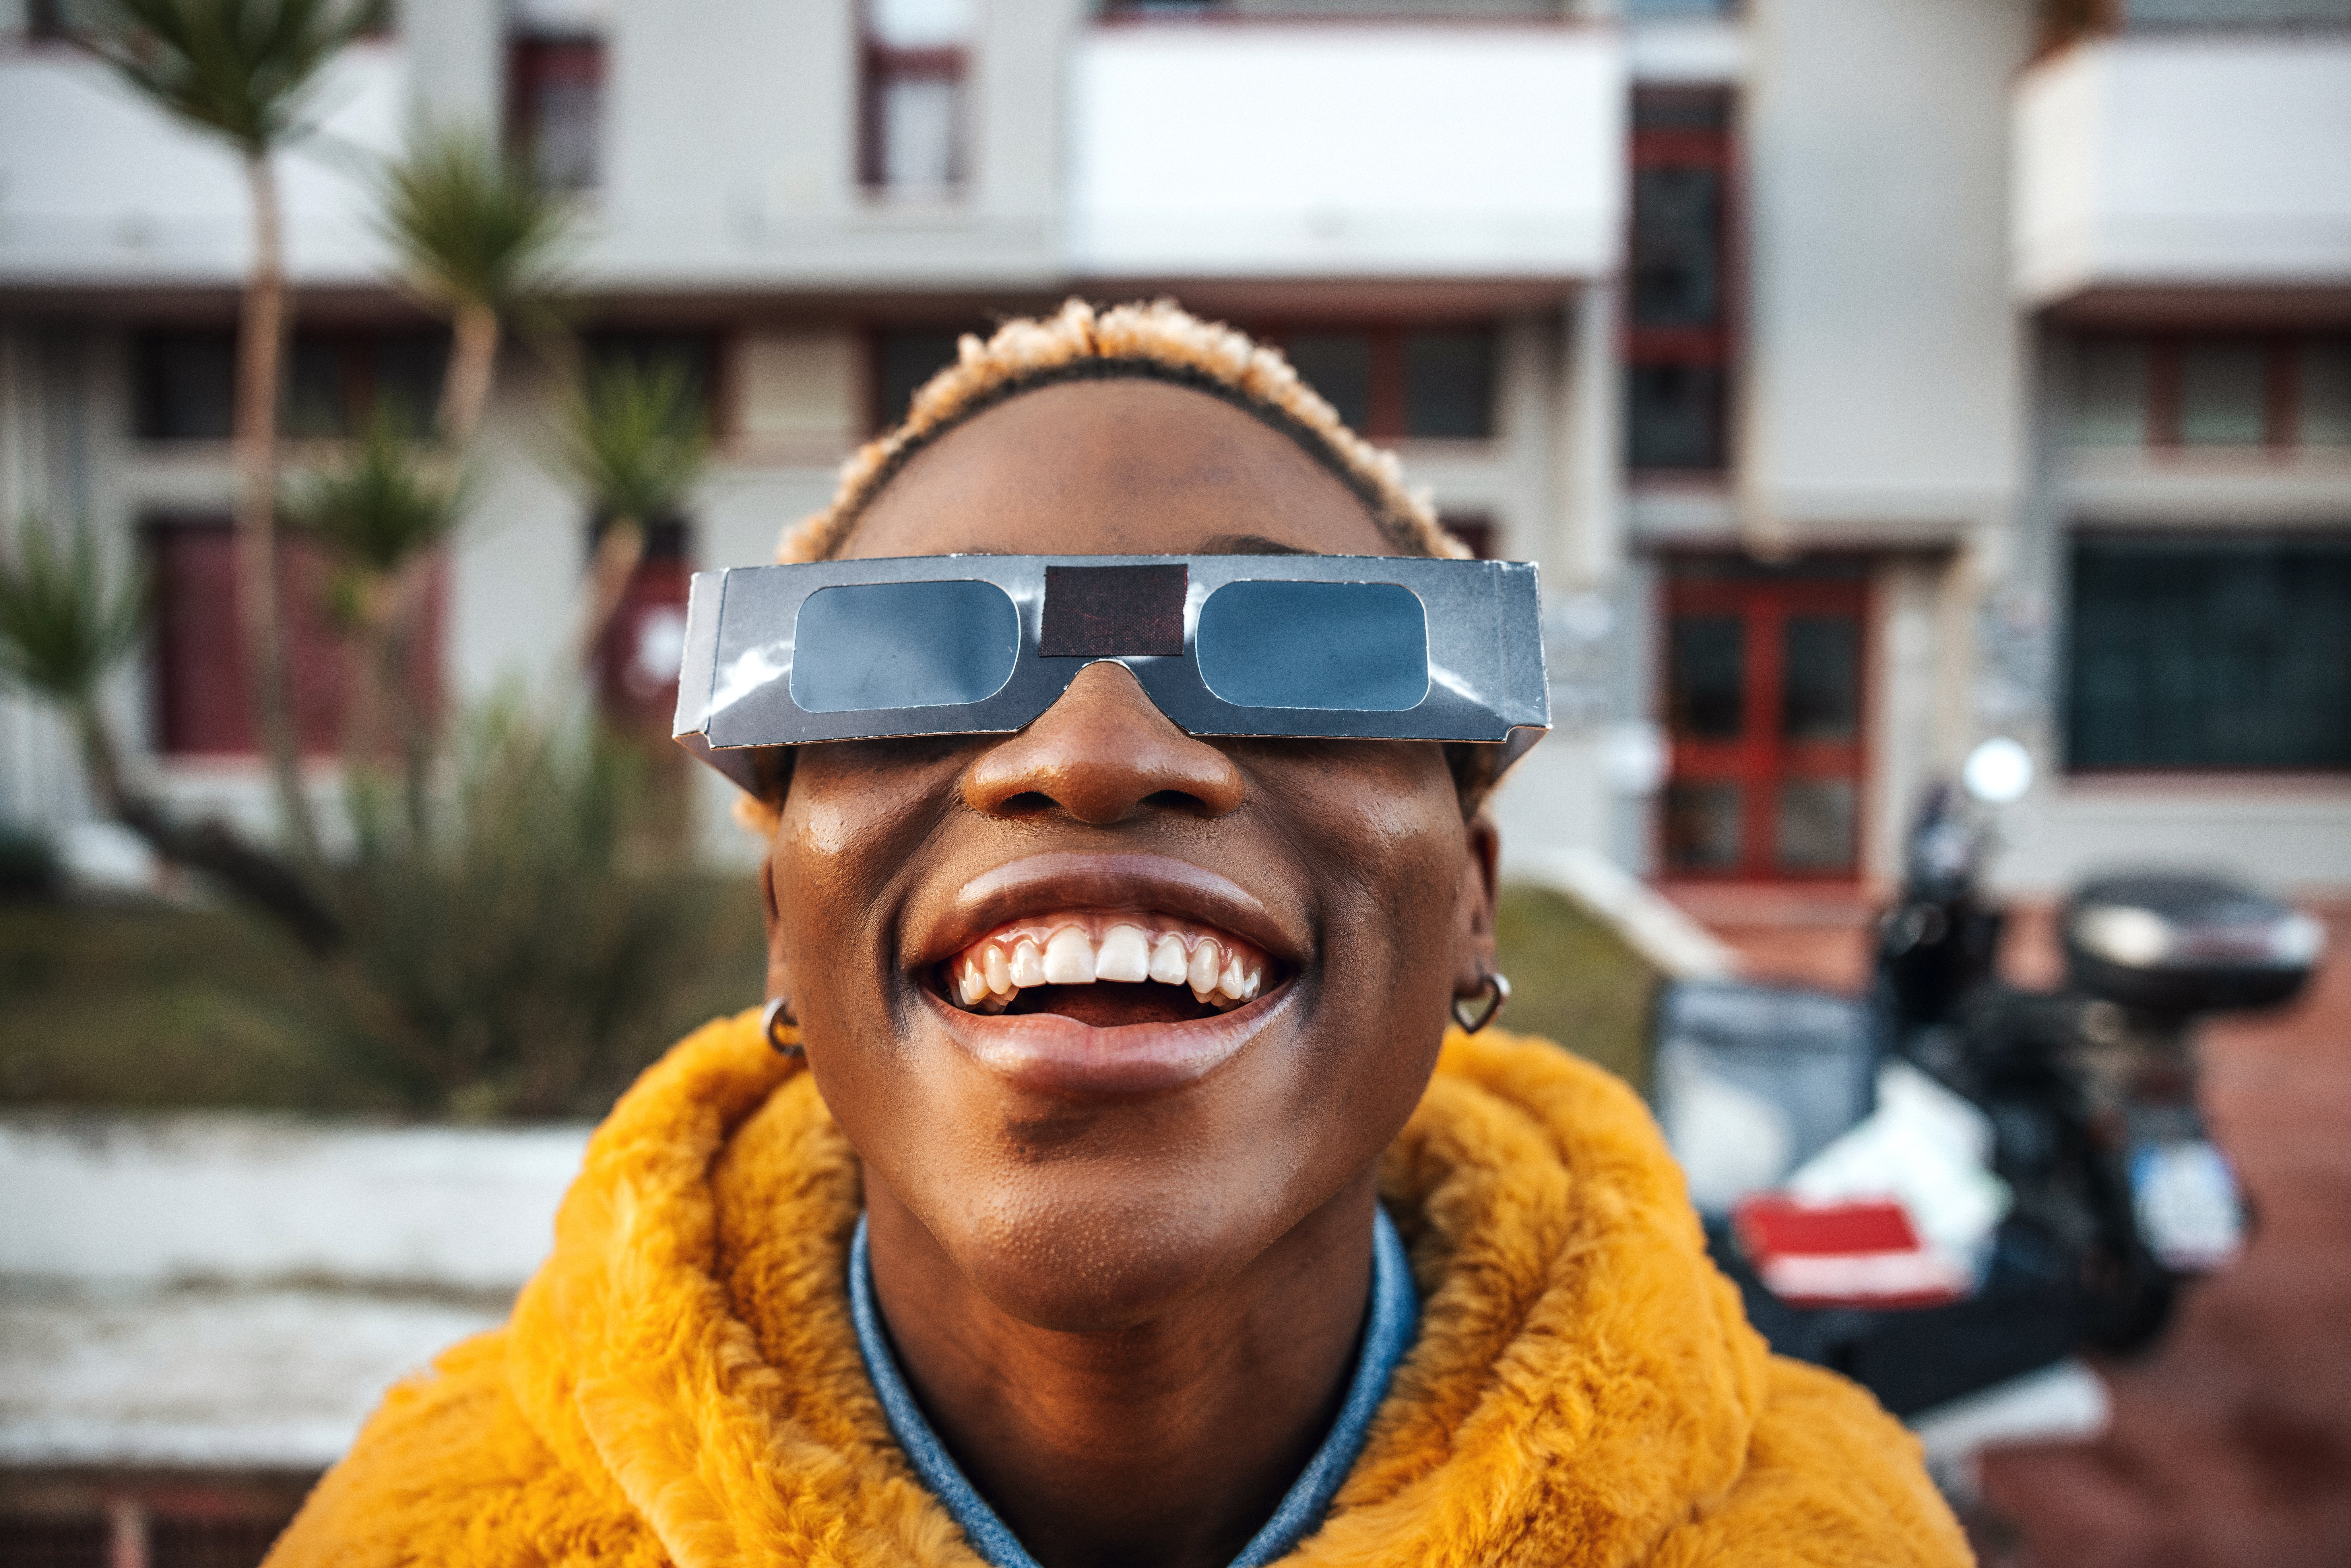 Young black woman wearing eclipse glasses and bright yellow jacket smiles while looking upward